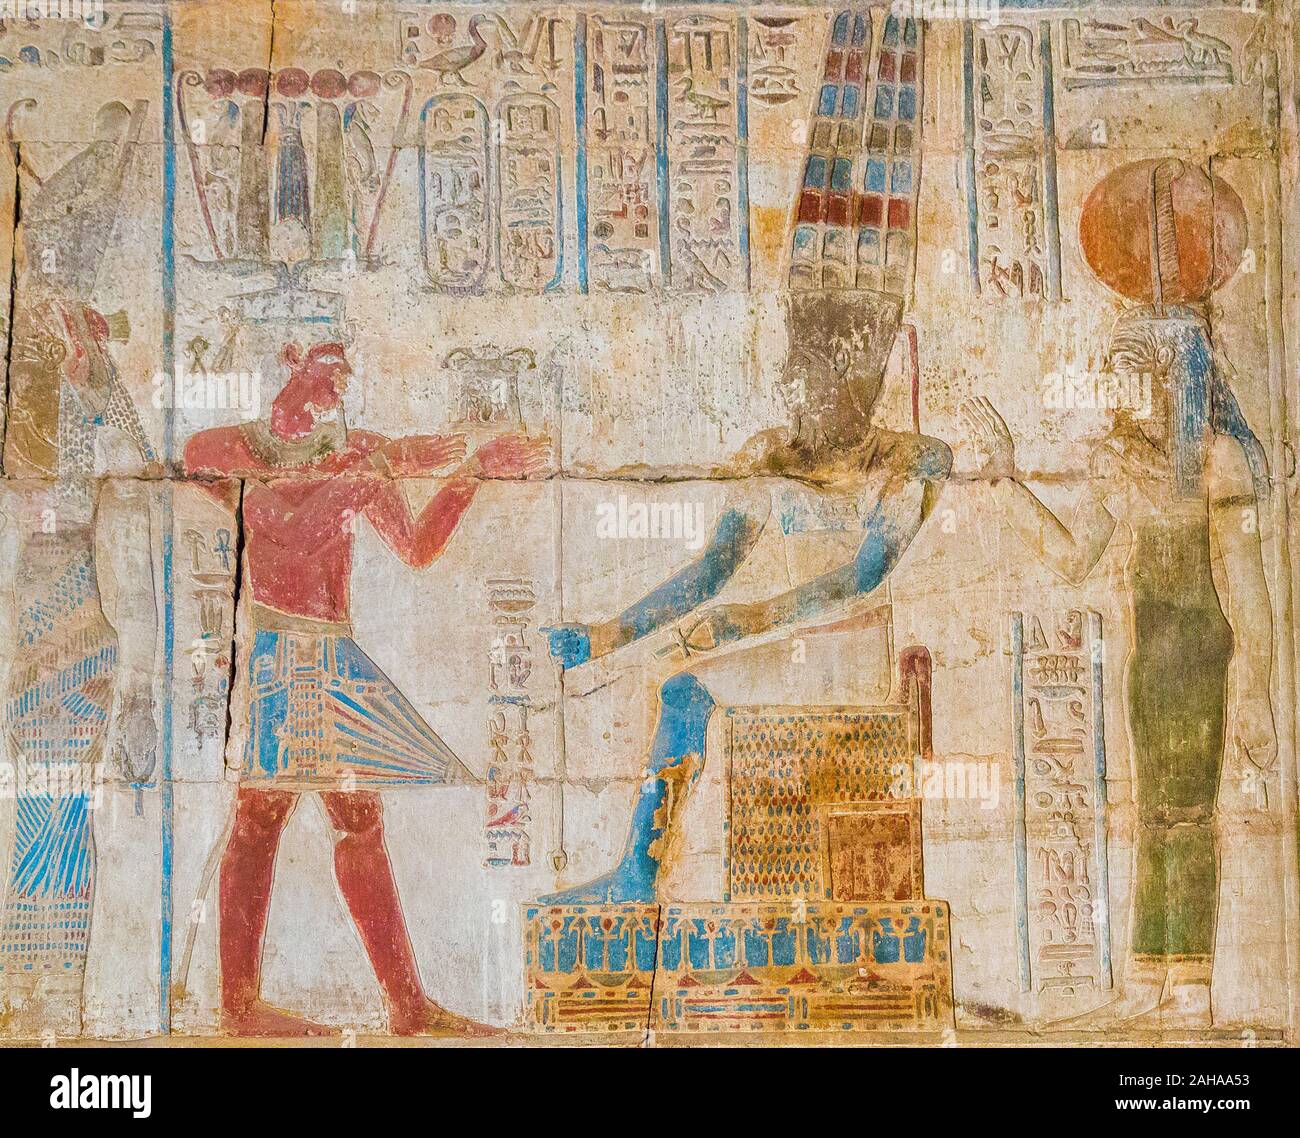 Thebes in Egypt, Karnak site, ptolemaic temple of Opet. The king, wearing a hemhem crown and a starched loincloth, offers  a pectoral to god Amun. Stock Photo